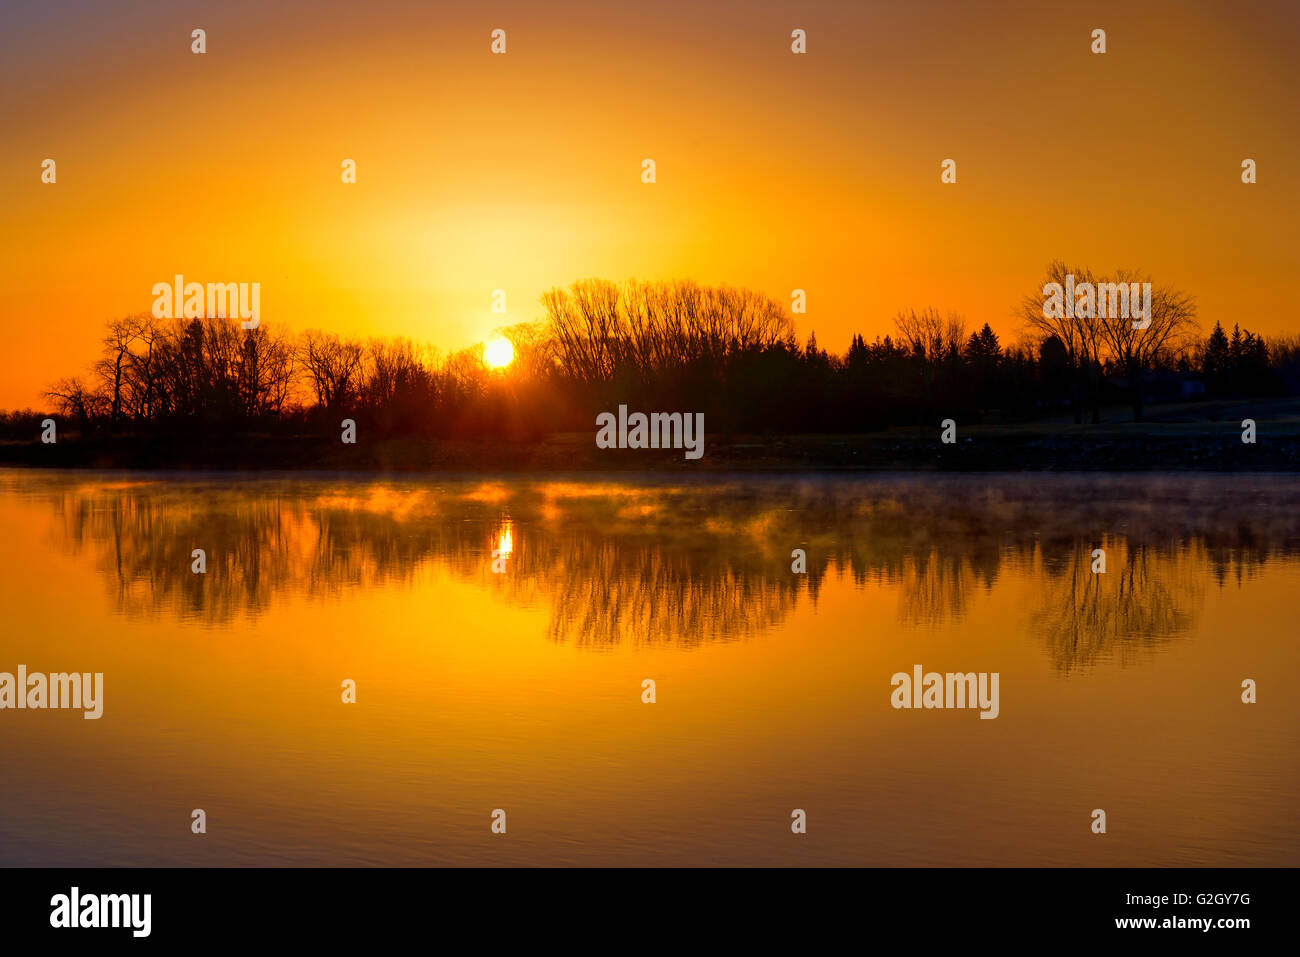 Reflection of trees in Red River at sunrise Lockport Manitoba Canada Stock Photo